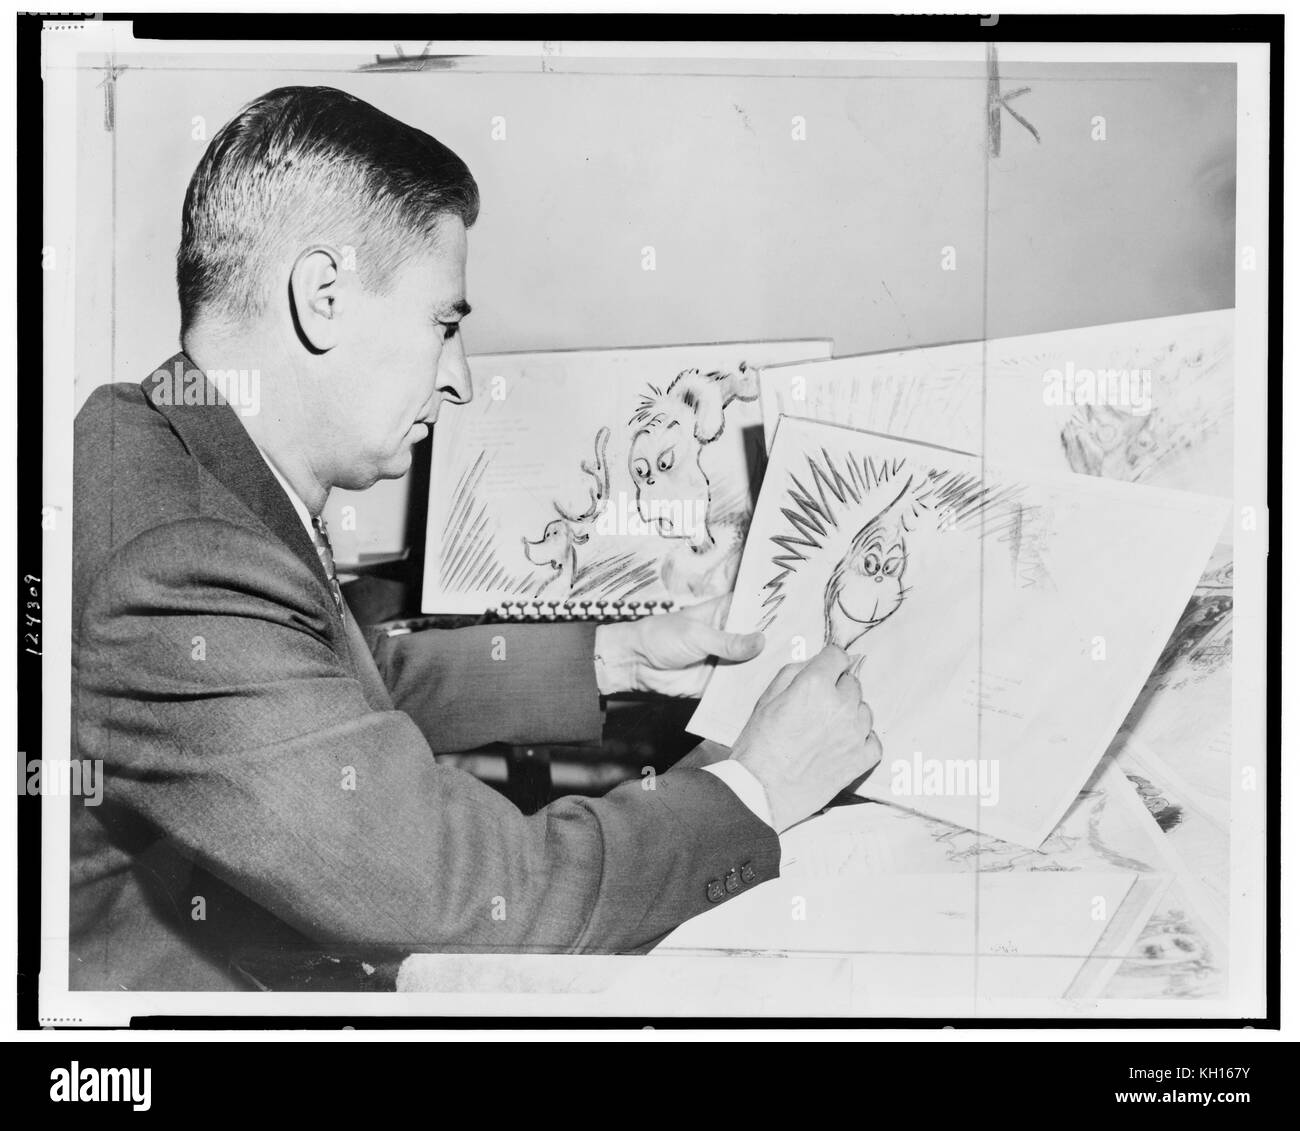 Dr. Seuss (Ted Geisel) at work on a drawing of a grinch, the hero of his forthcoming book, 'How the Grinch Stole Christmas.' Photo by Al Ravenna. New York, NY 1957. Stock Photo